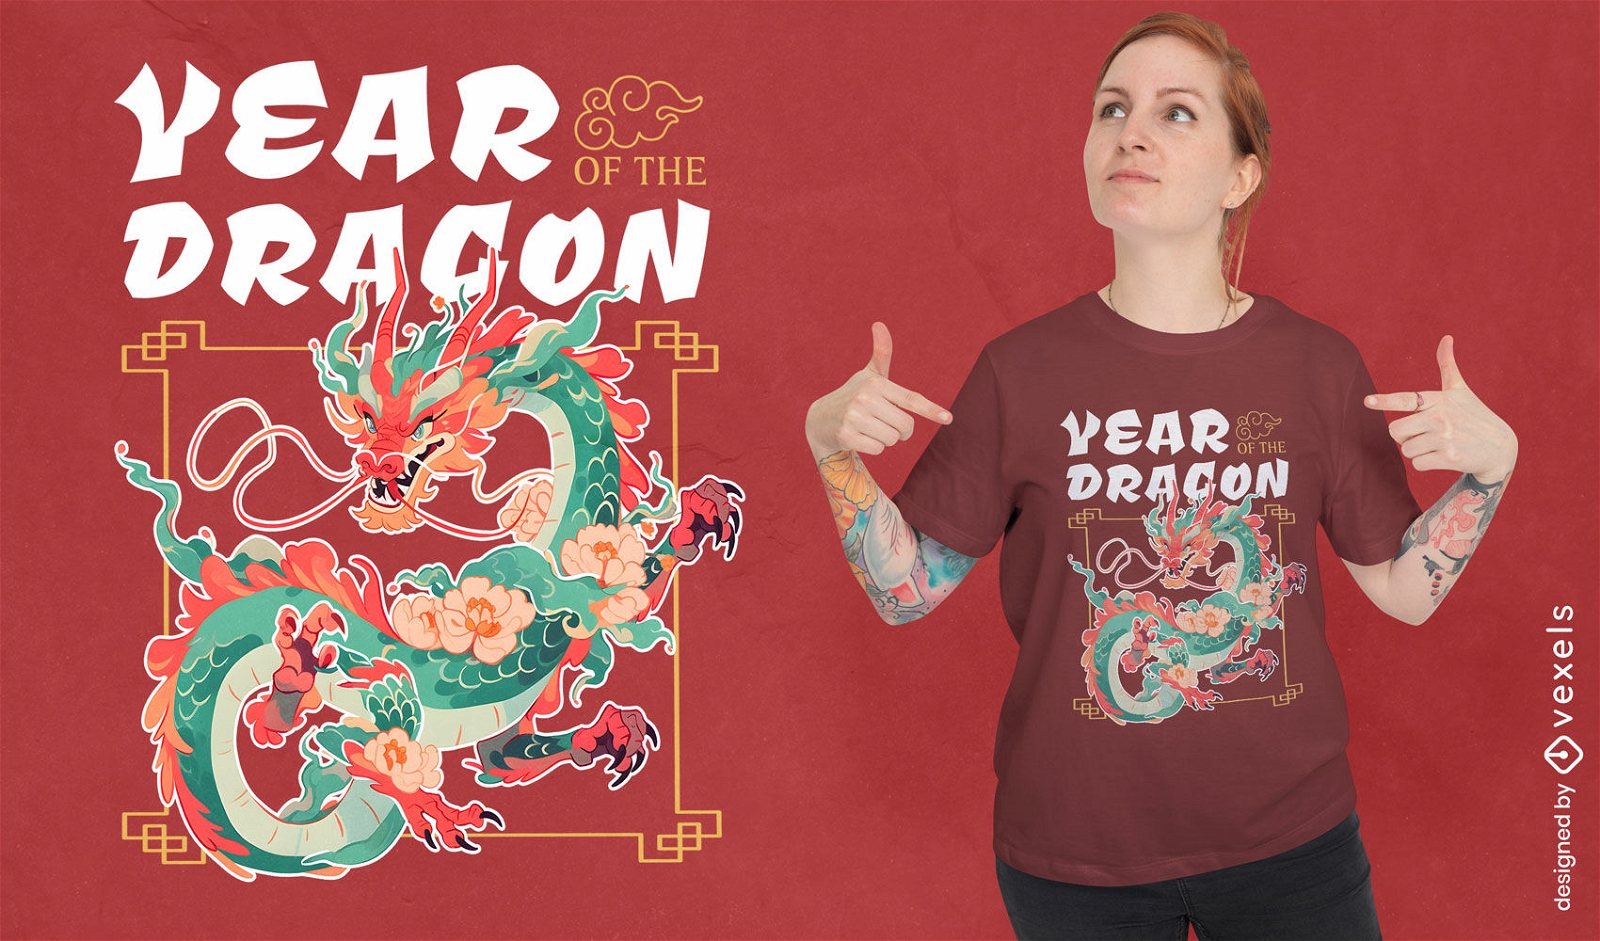 Year of the dragon creature t-shirt design